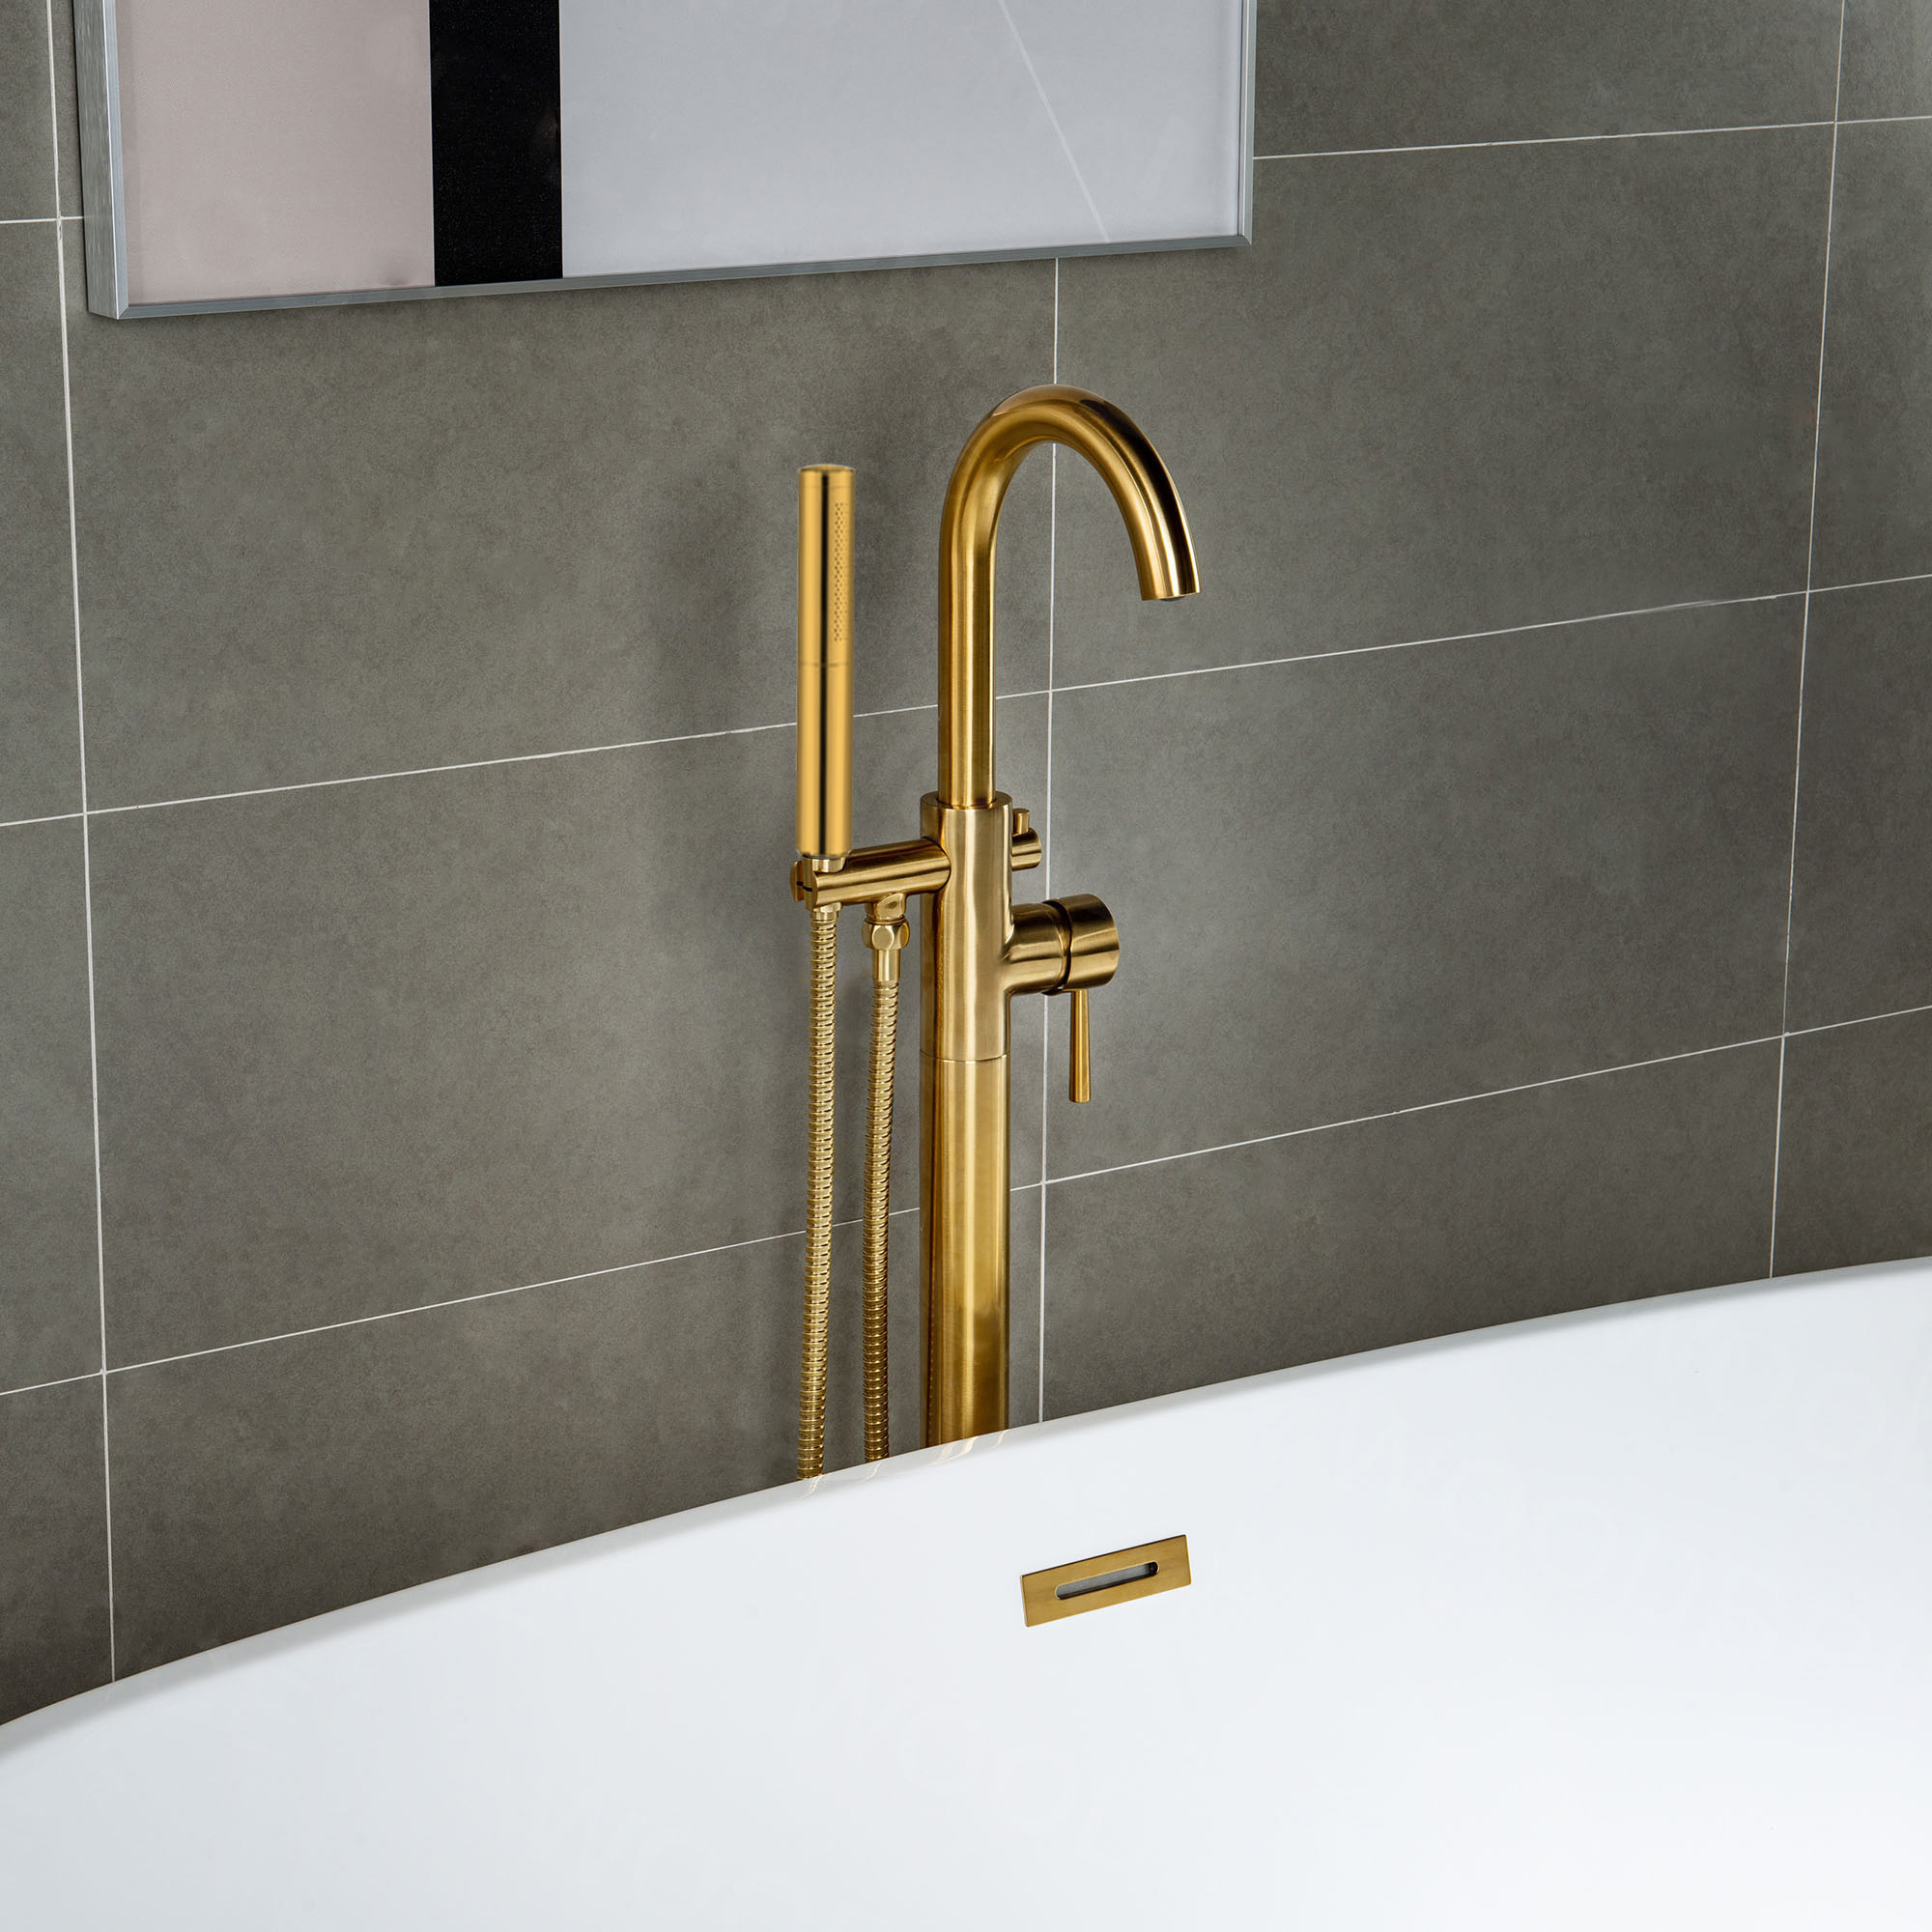  WOODBRIDGE F0007BGDR Contemporary Single Handle Floor Mount Freestanding Tub Filler Faucet with Hand shower in Brushed Gold Finish._14264